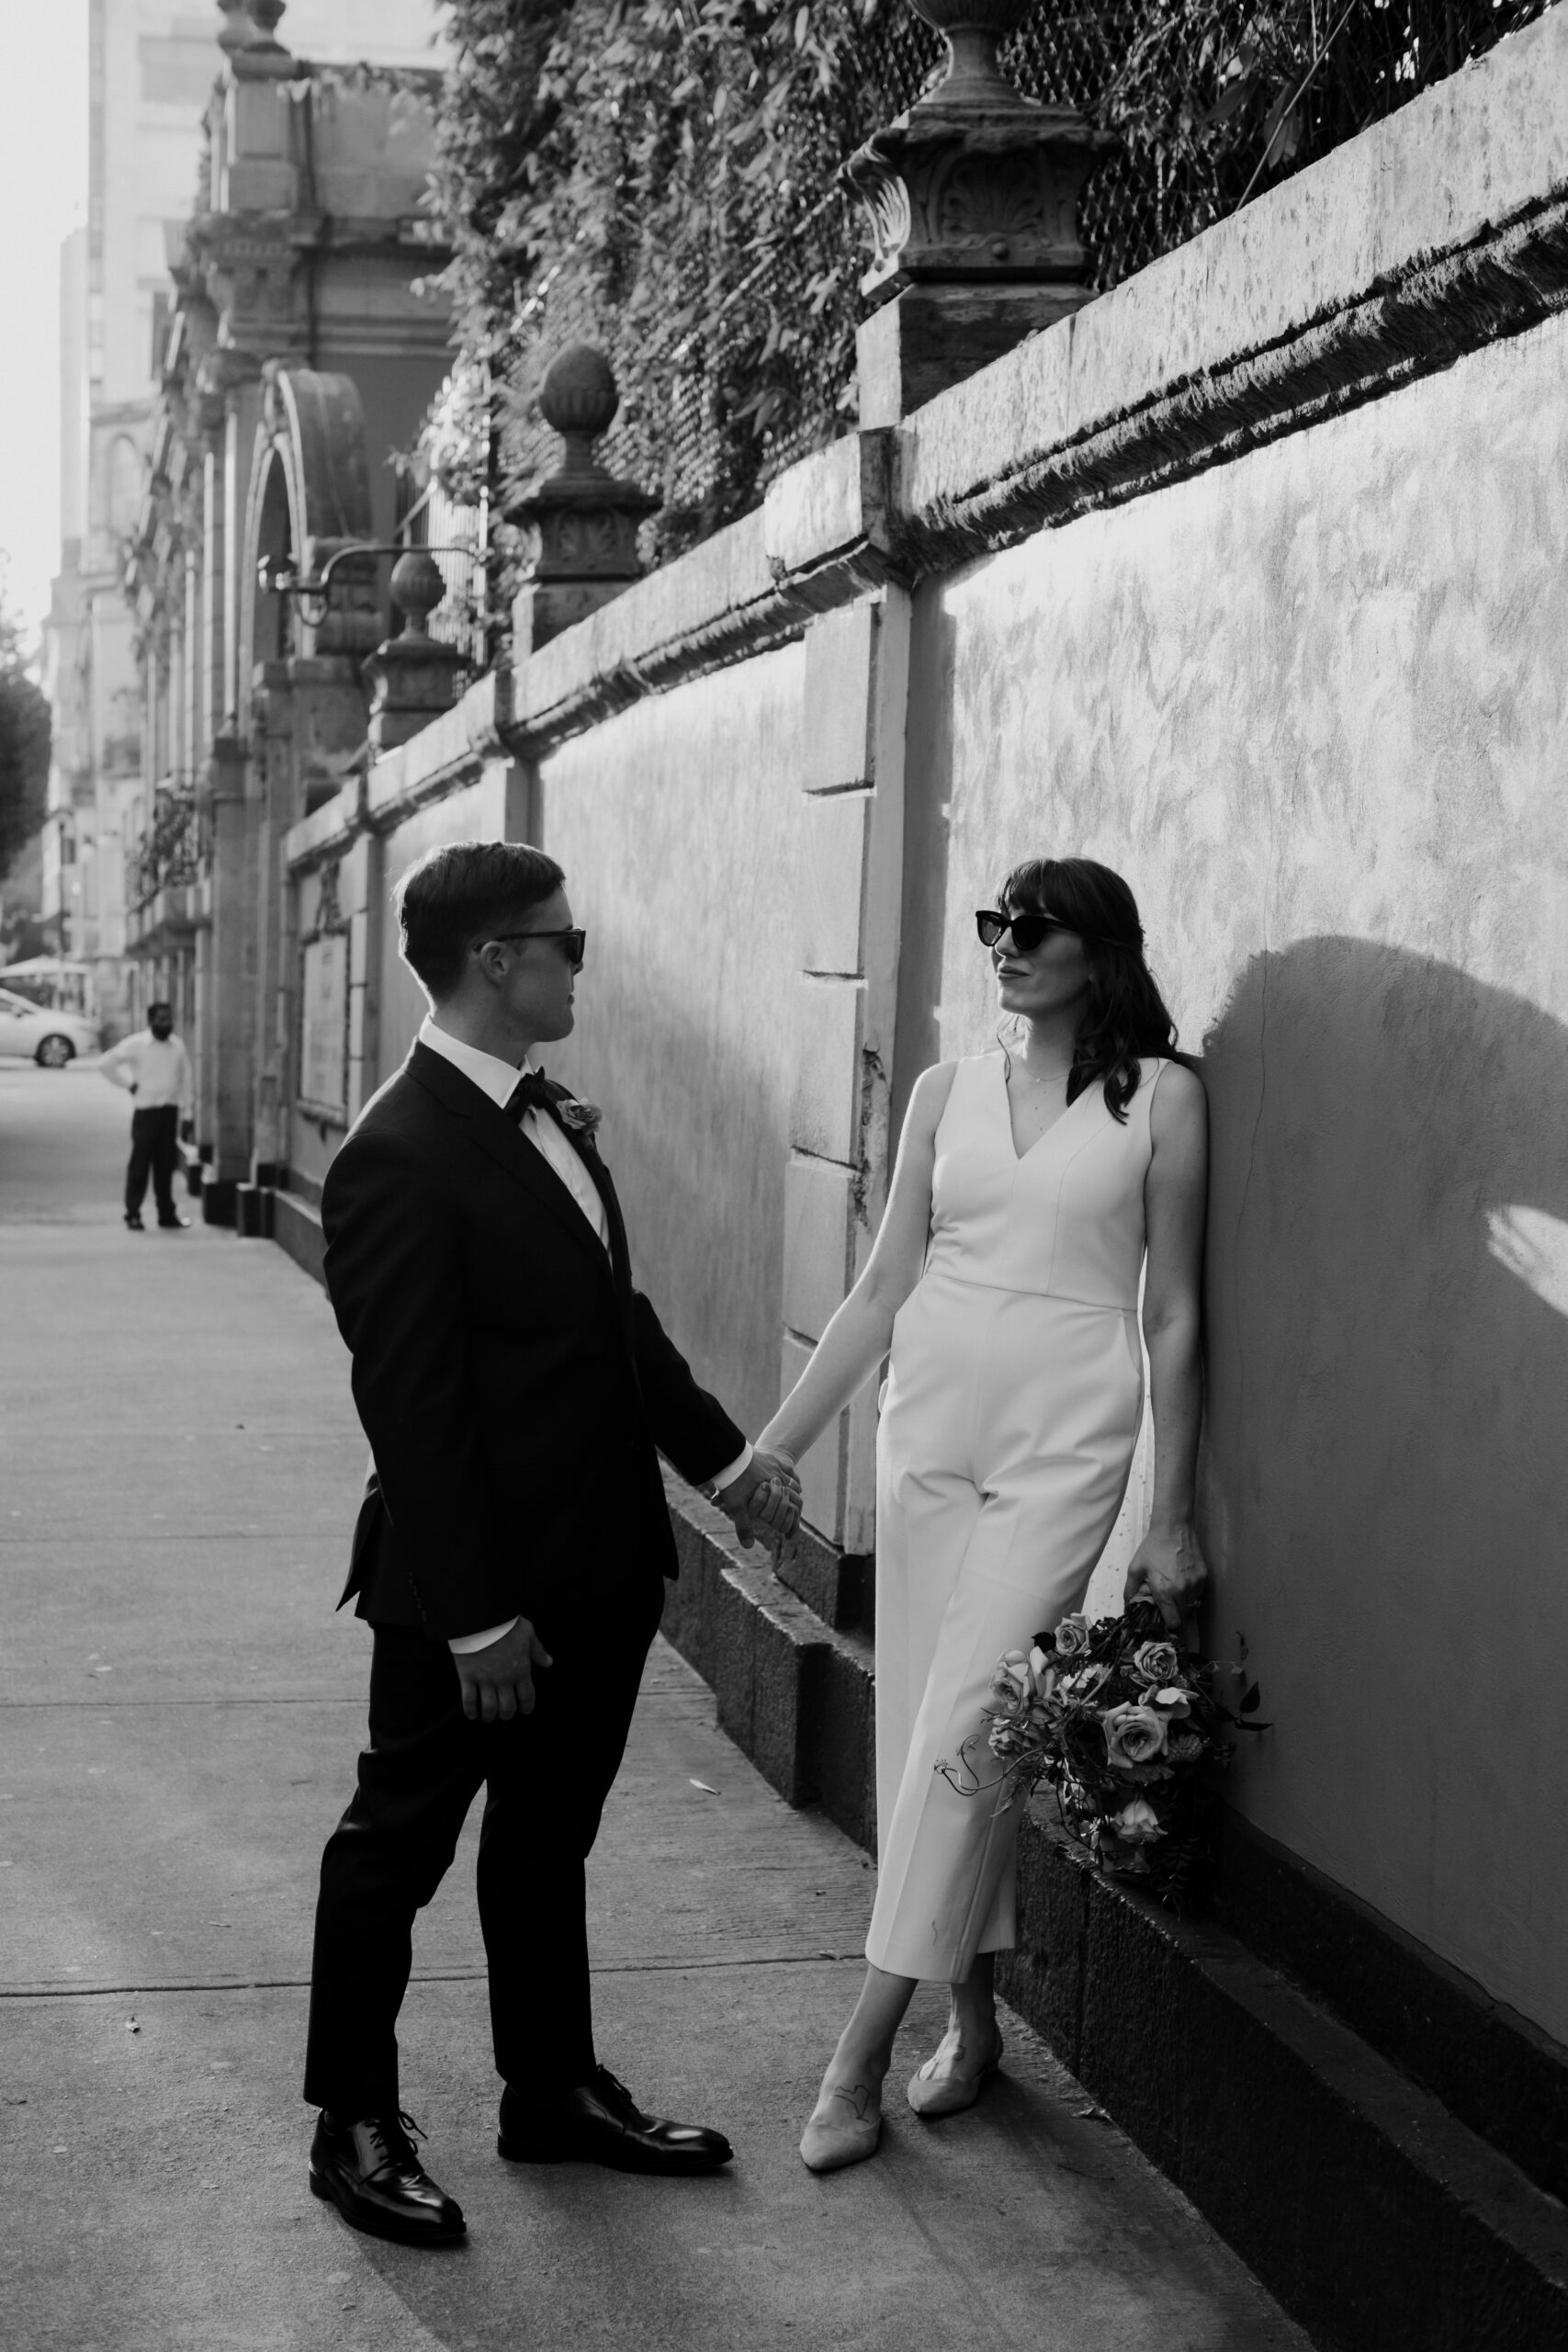 Stunning bride and groom pose together in the city